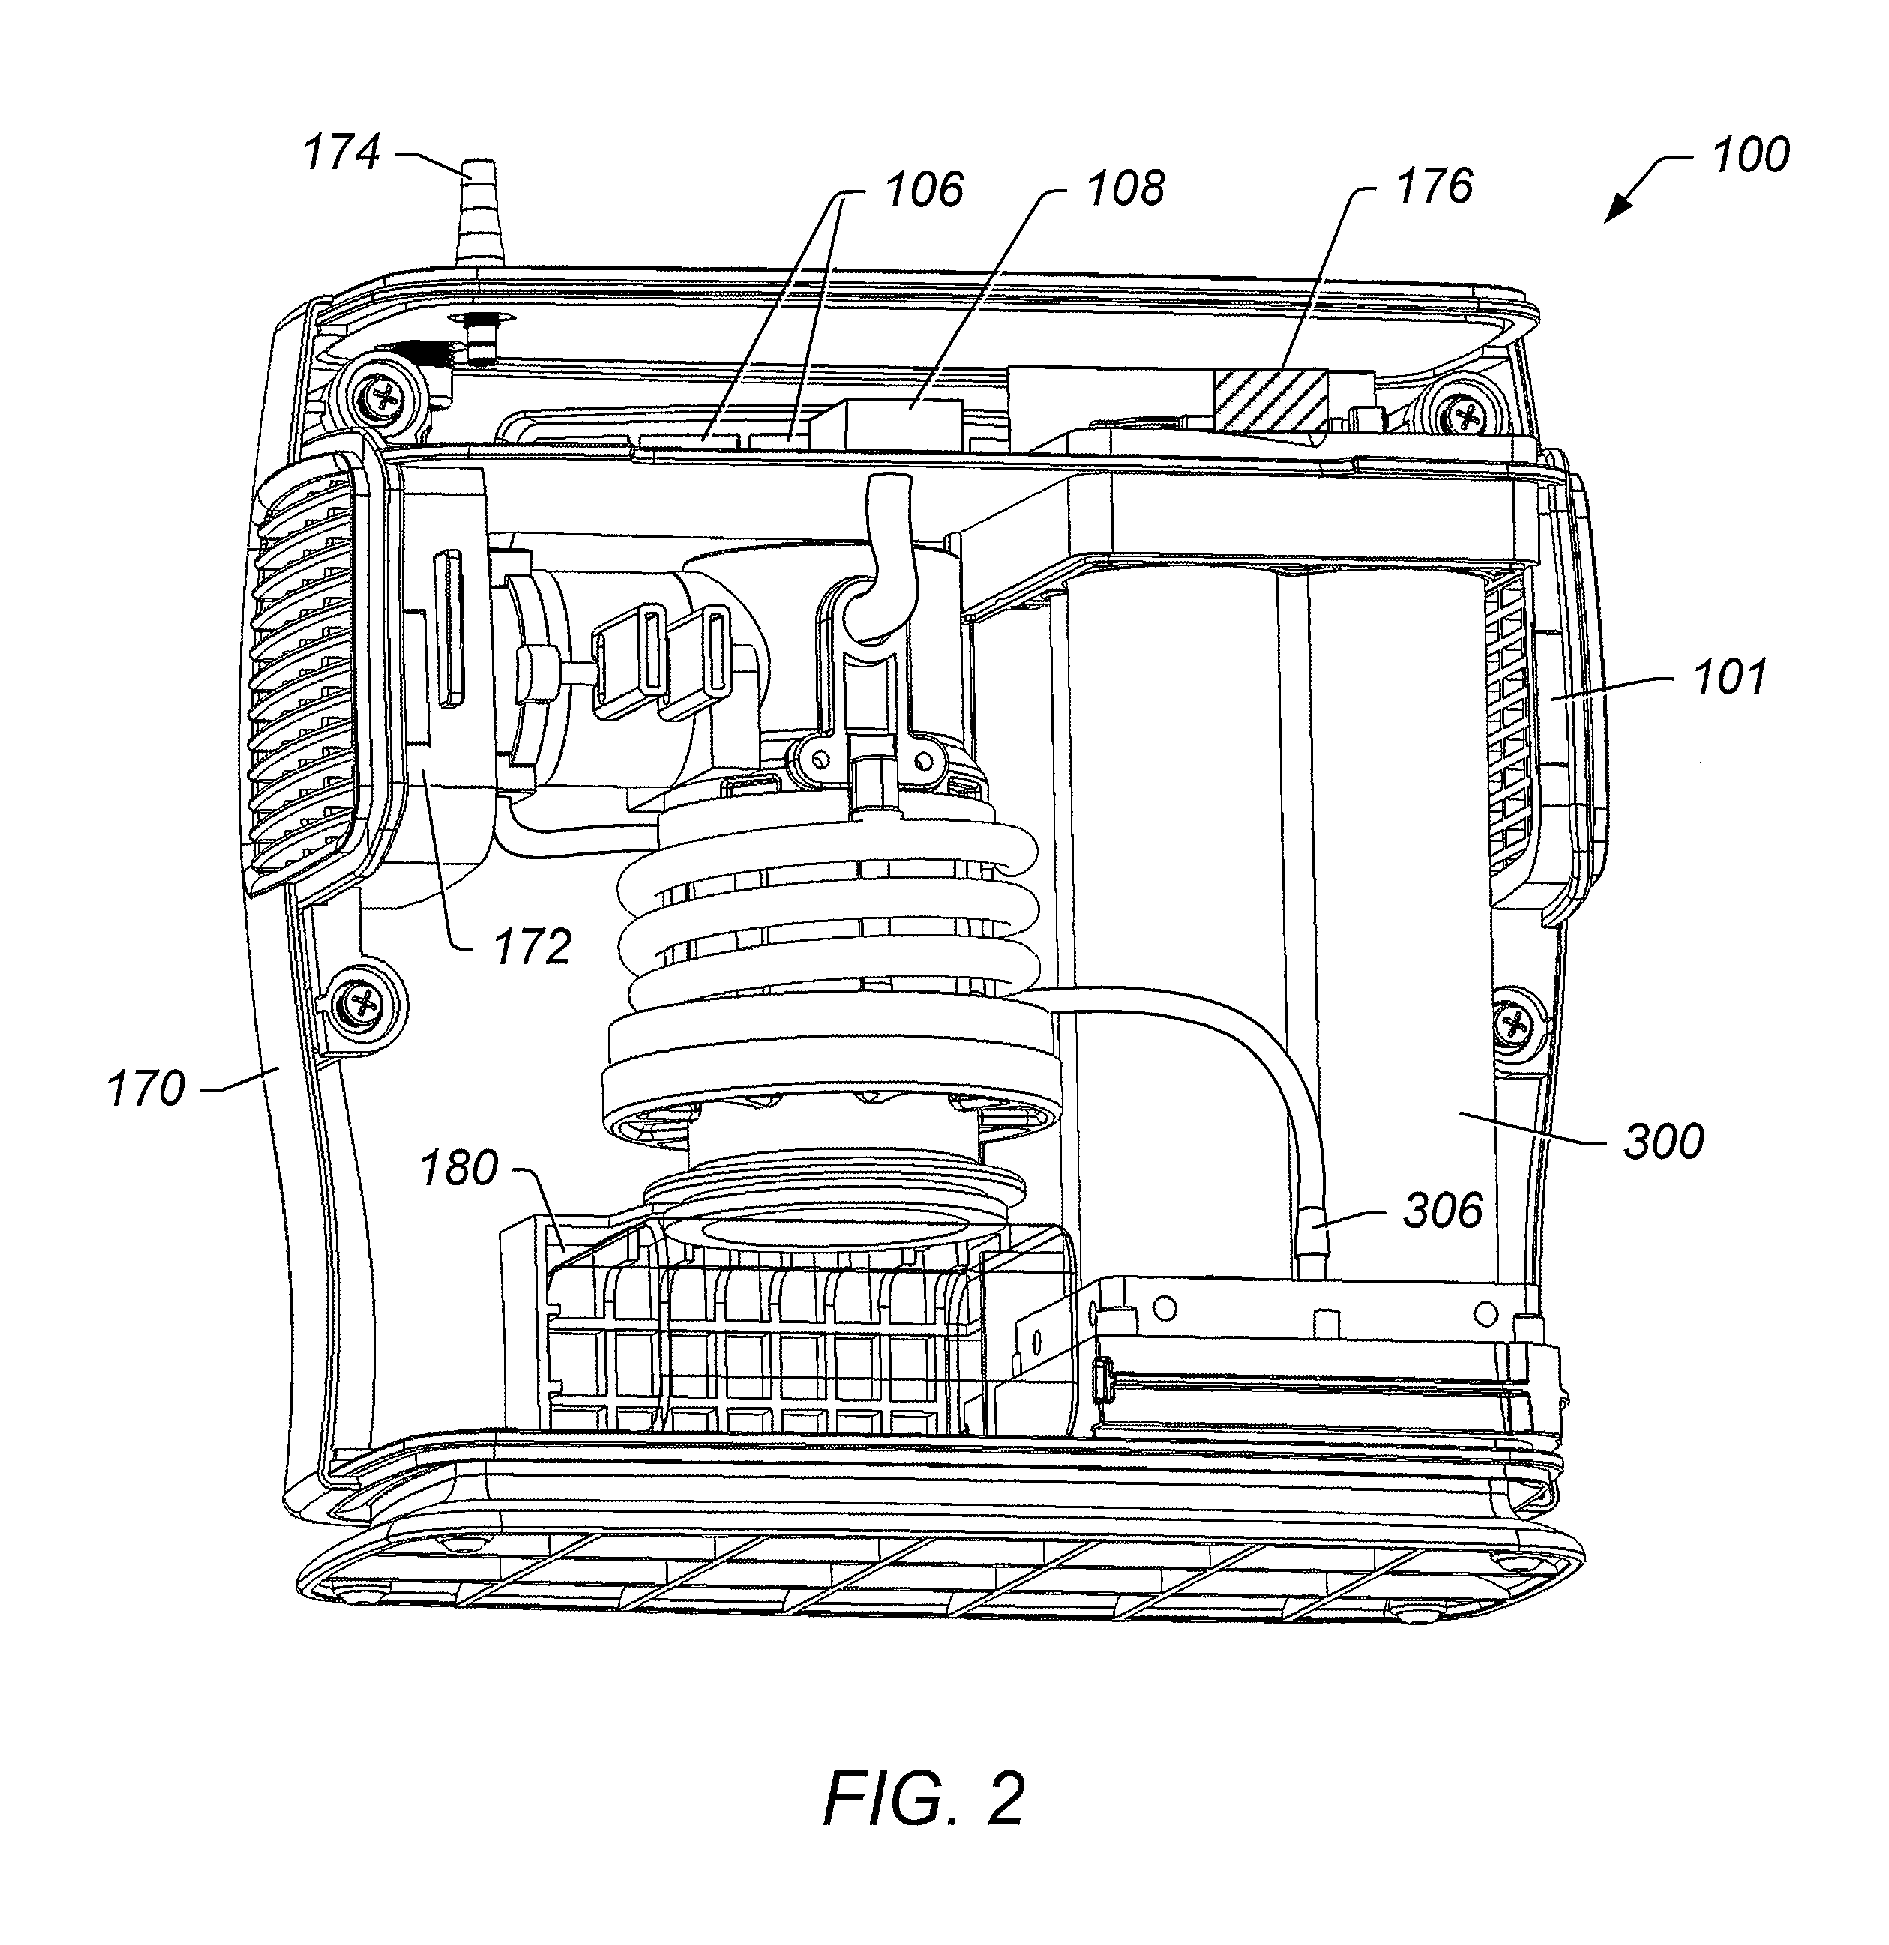 Methods and systems for providing oxygen enriched gas